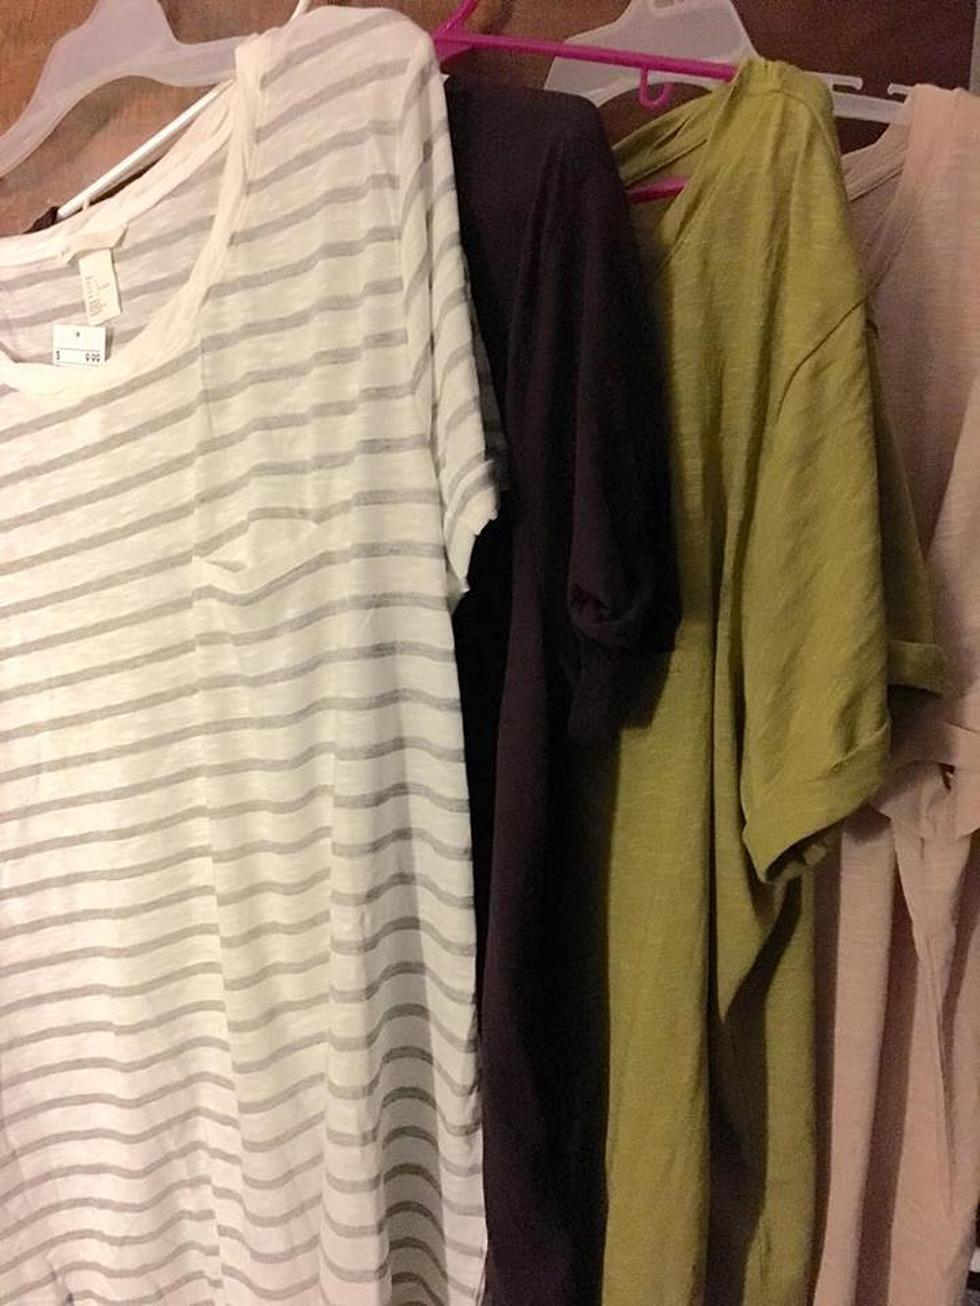 Is it Weird to Buy More Than One of the Same Shirt?